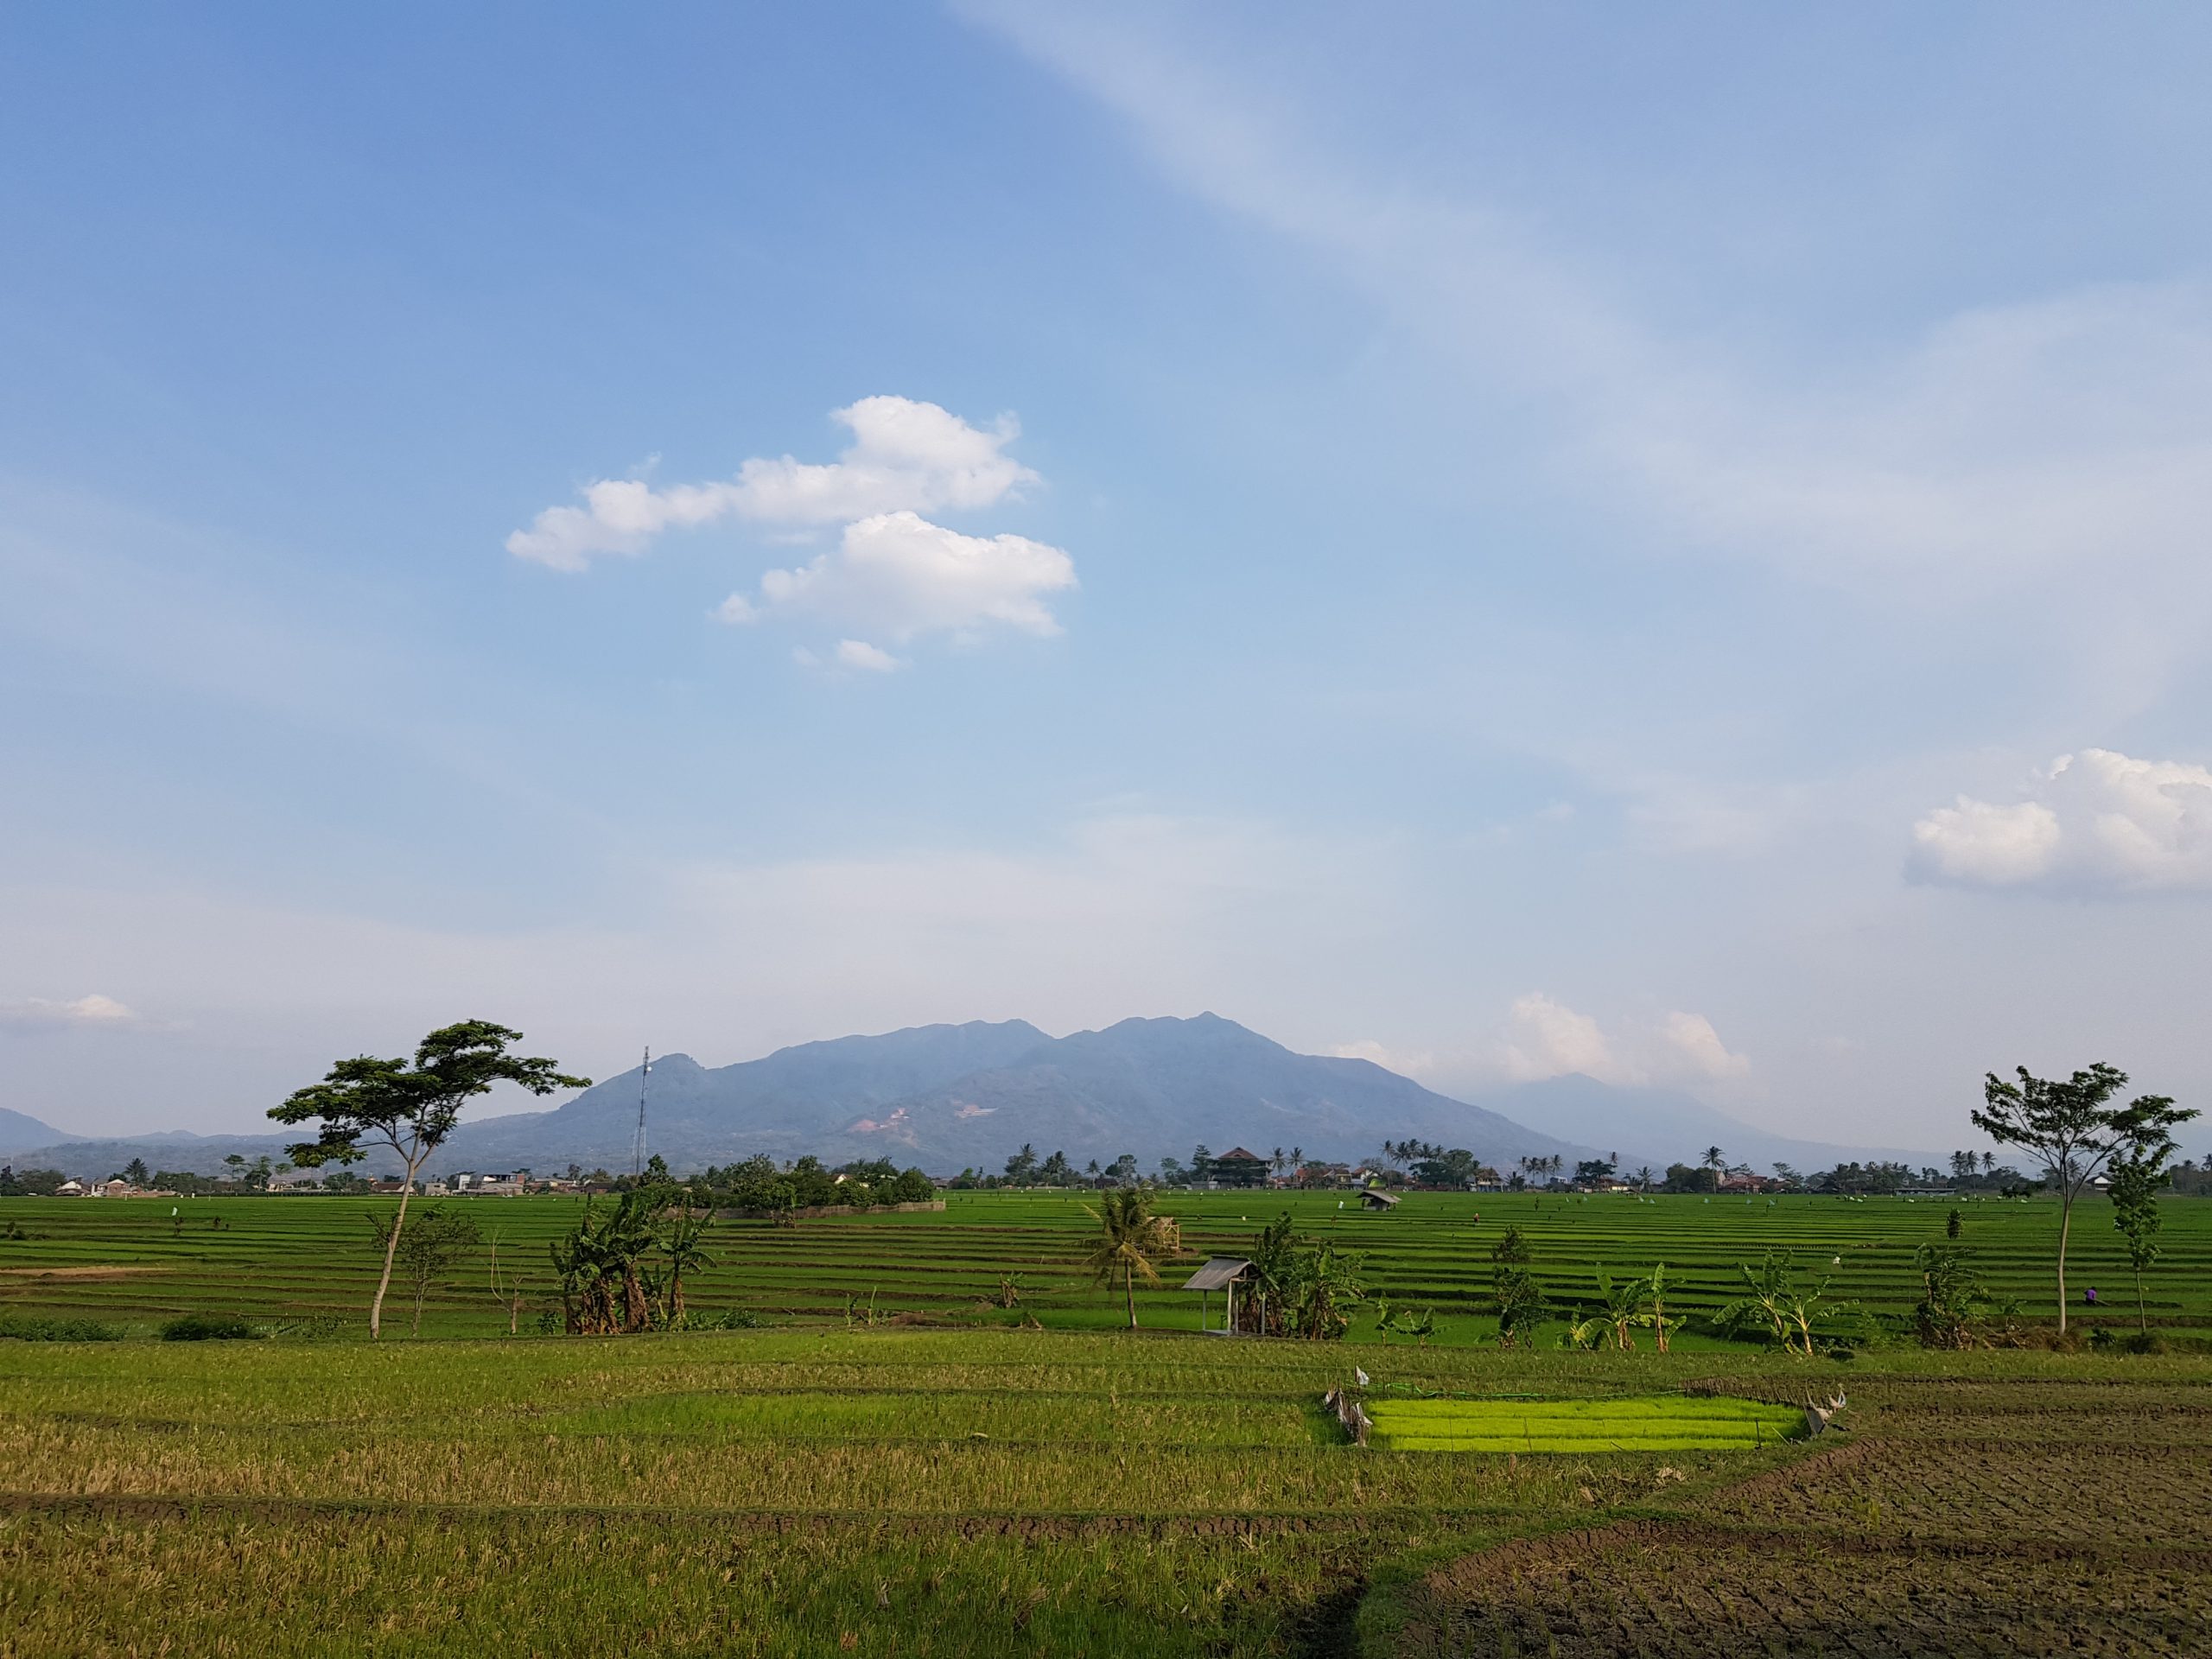 Indonesia's agricultural costs higher than other countries: Researchers